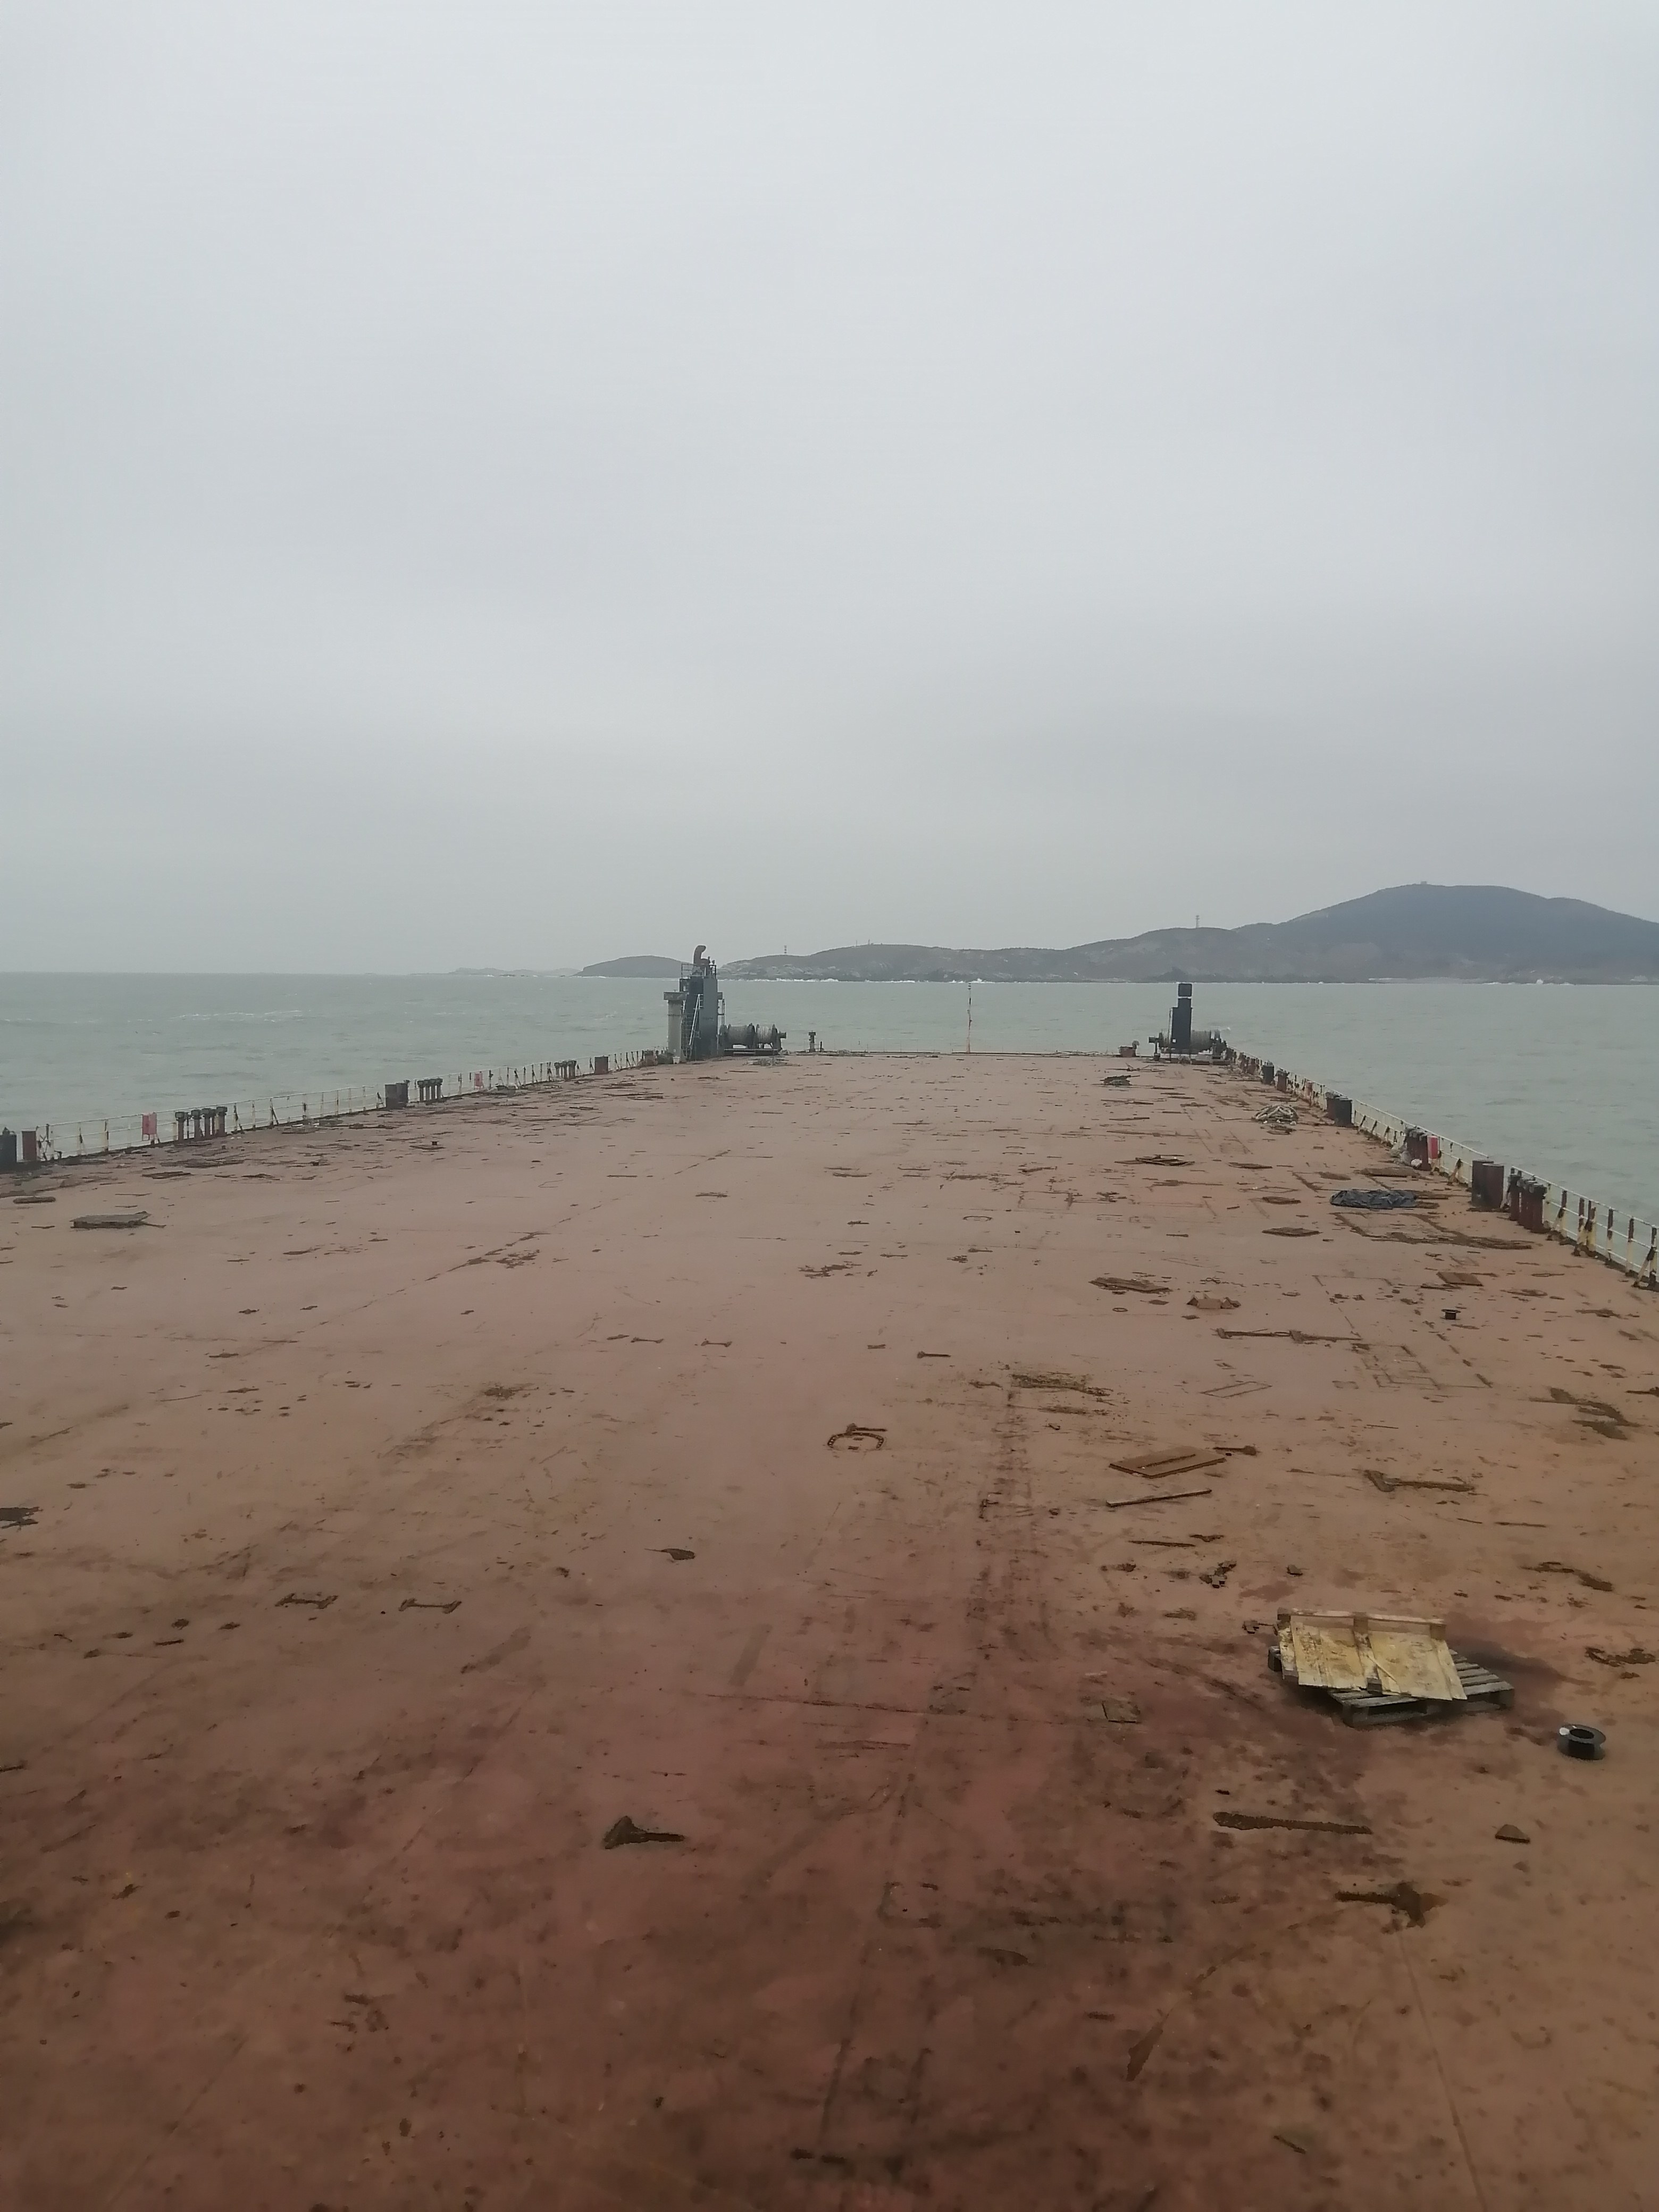 12000 T Deck Barge /LCT For Sale